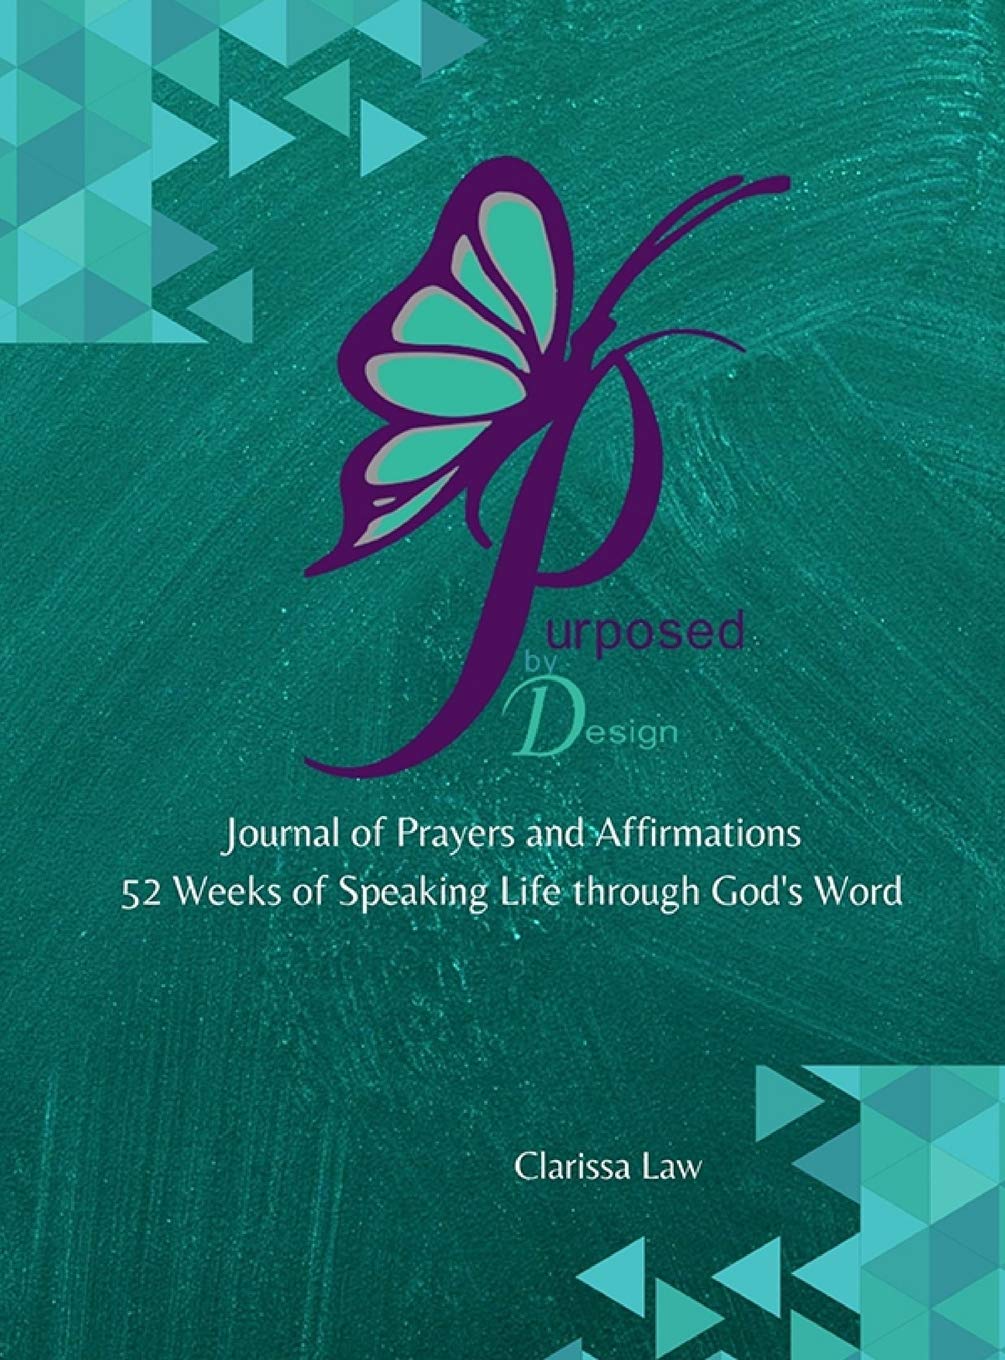 Purpose by Design Journal of Prayers and Affirmations: 52 Weeks of Speaking LIFE through God's word